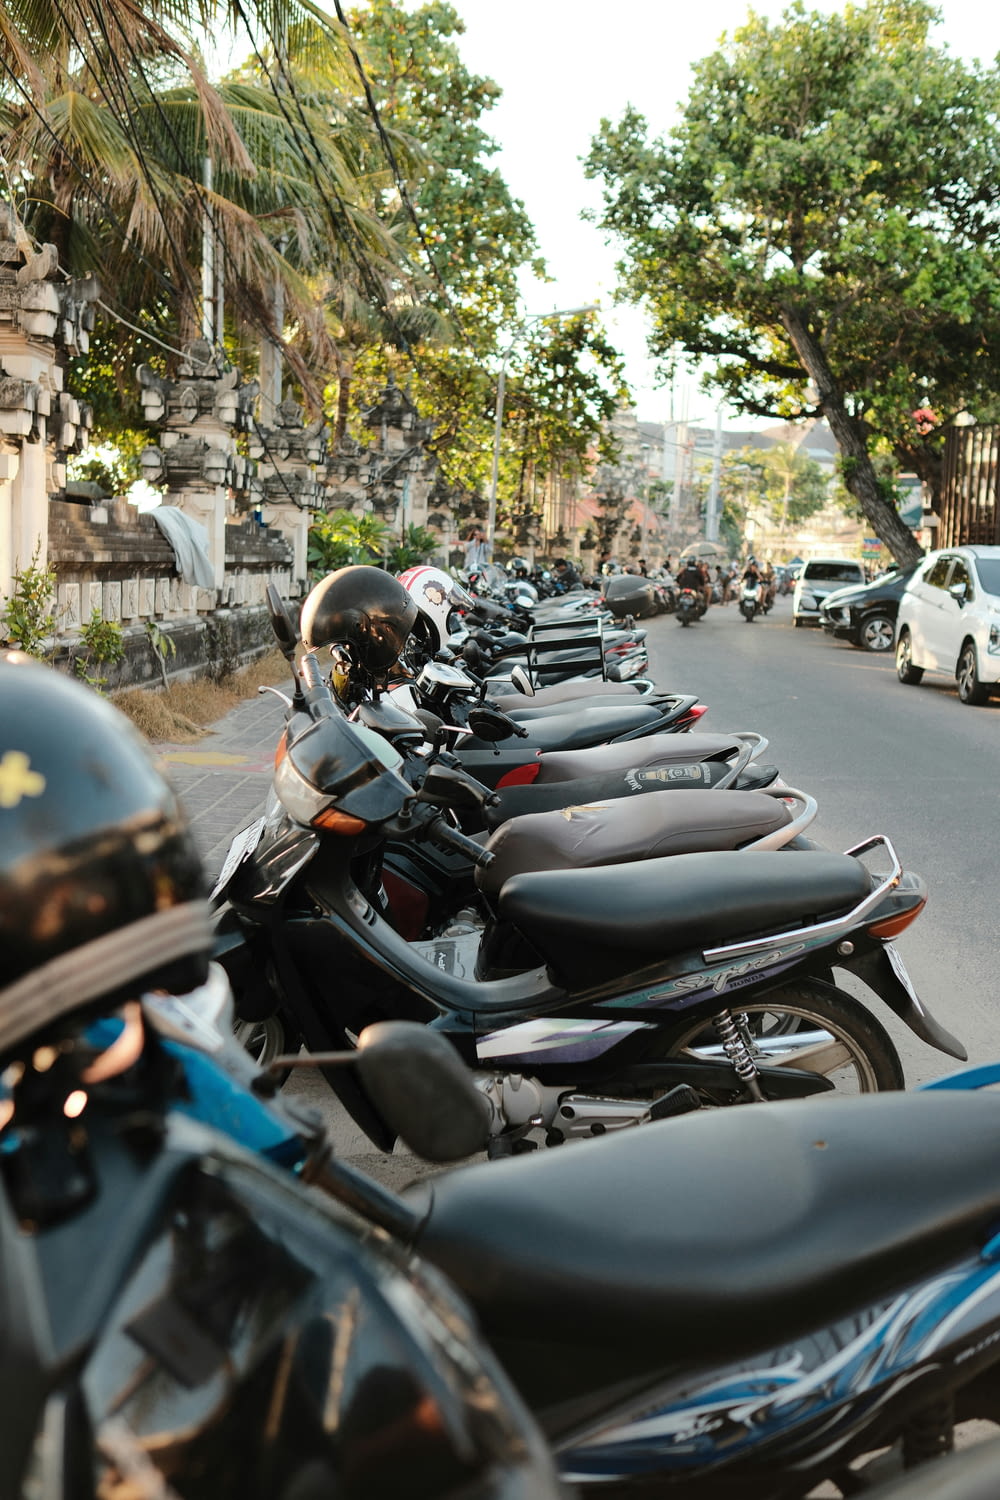 a row of motorcycles parked on the side of a street